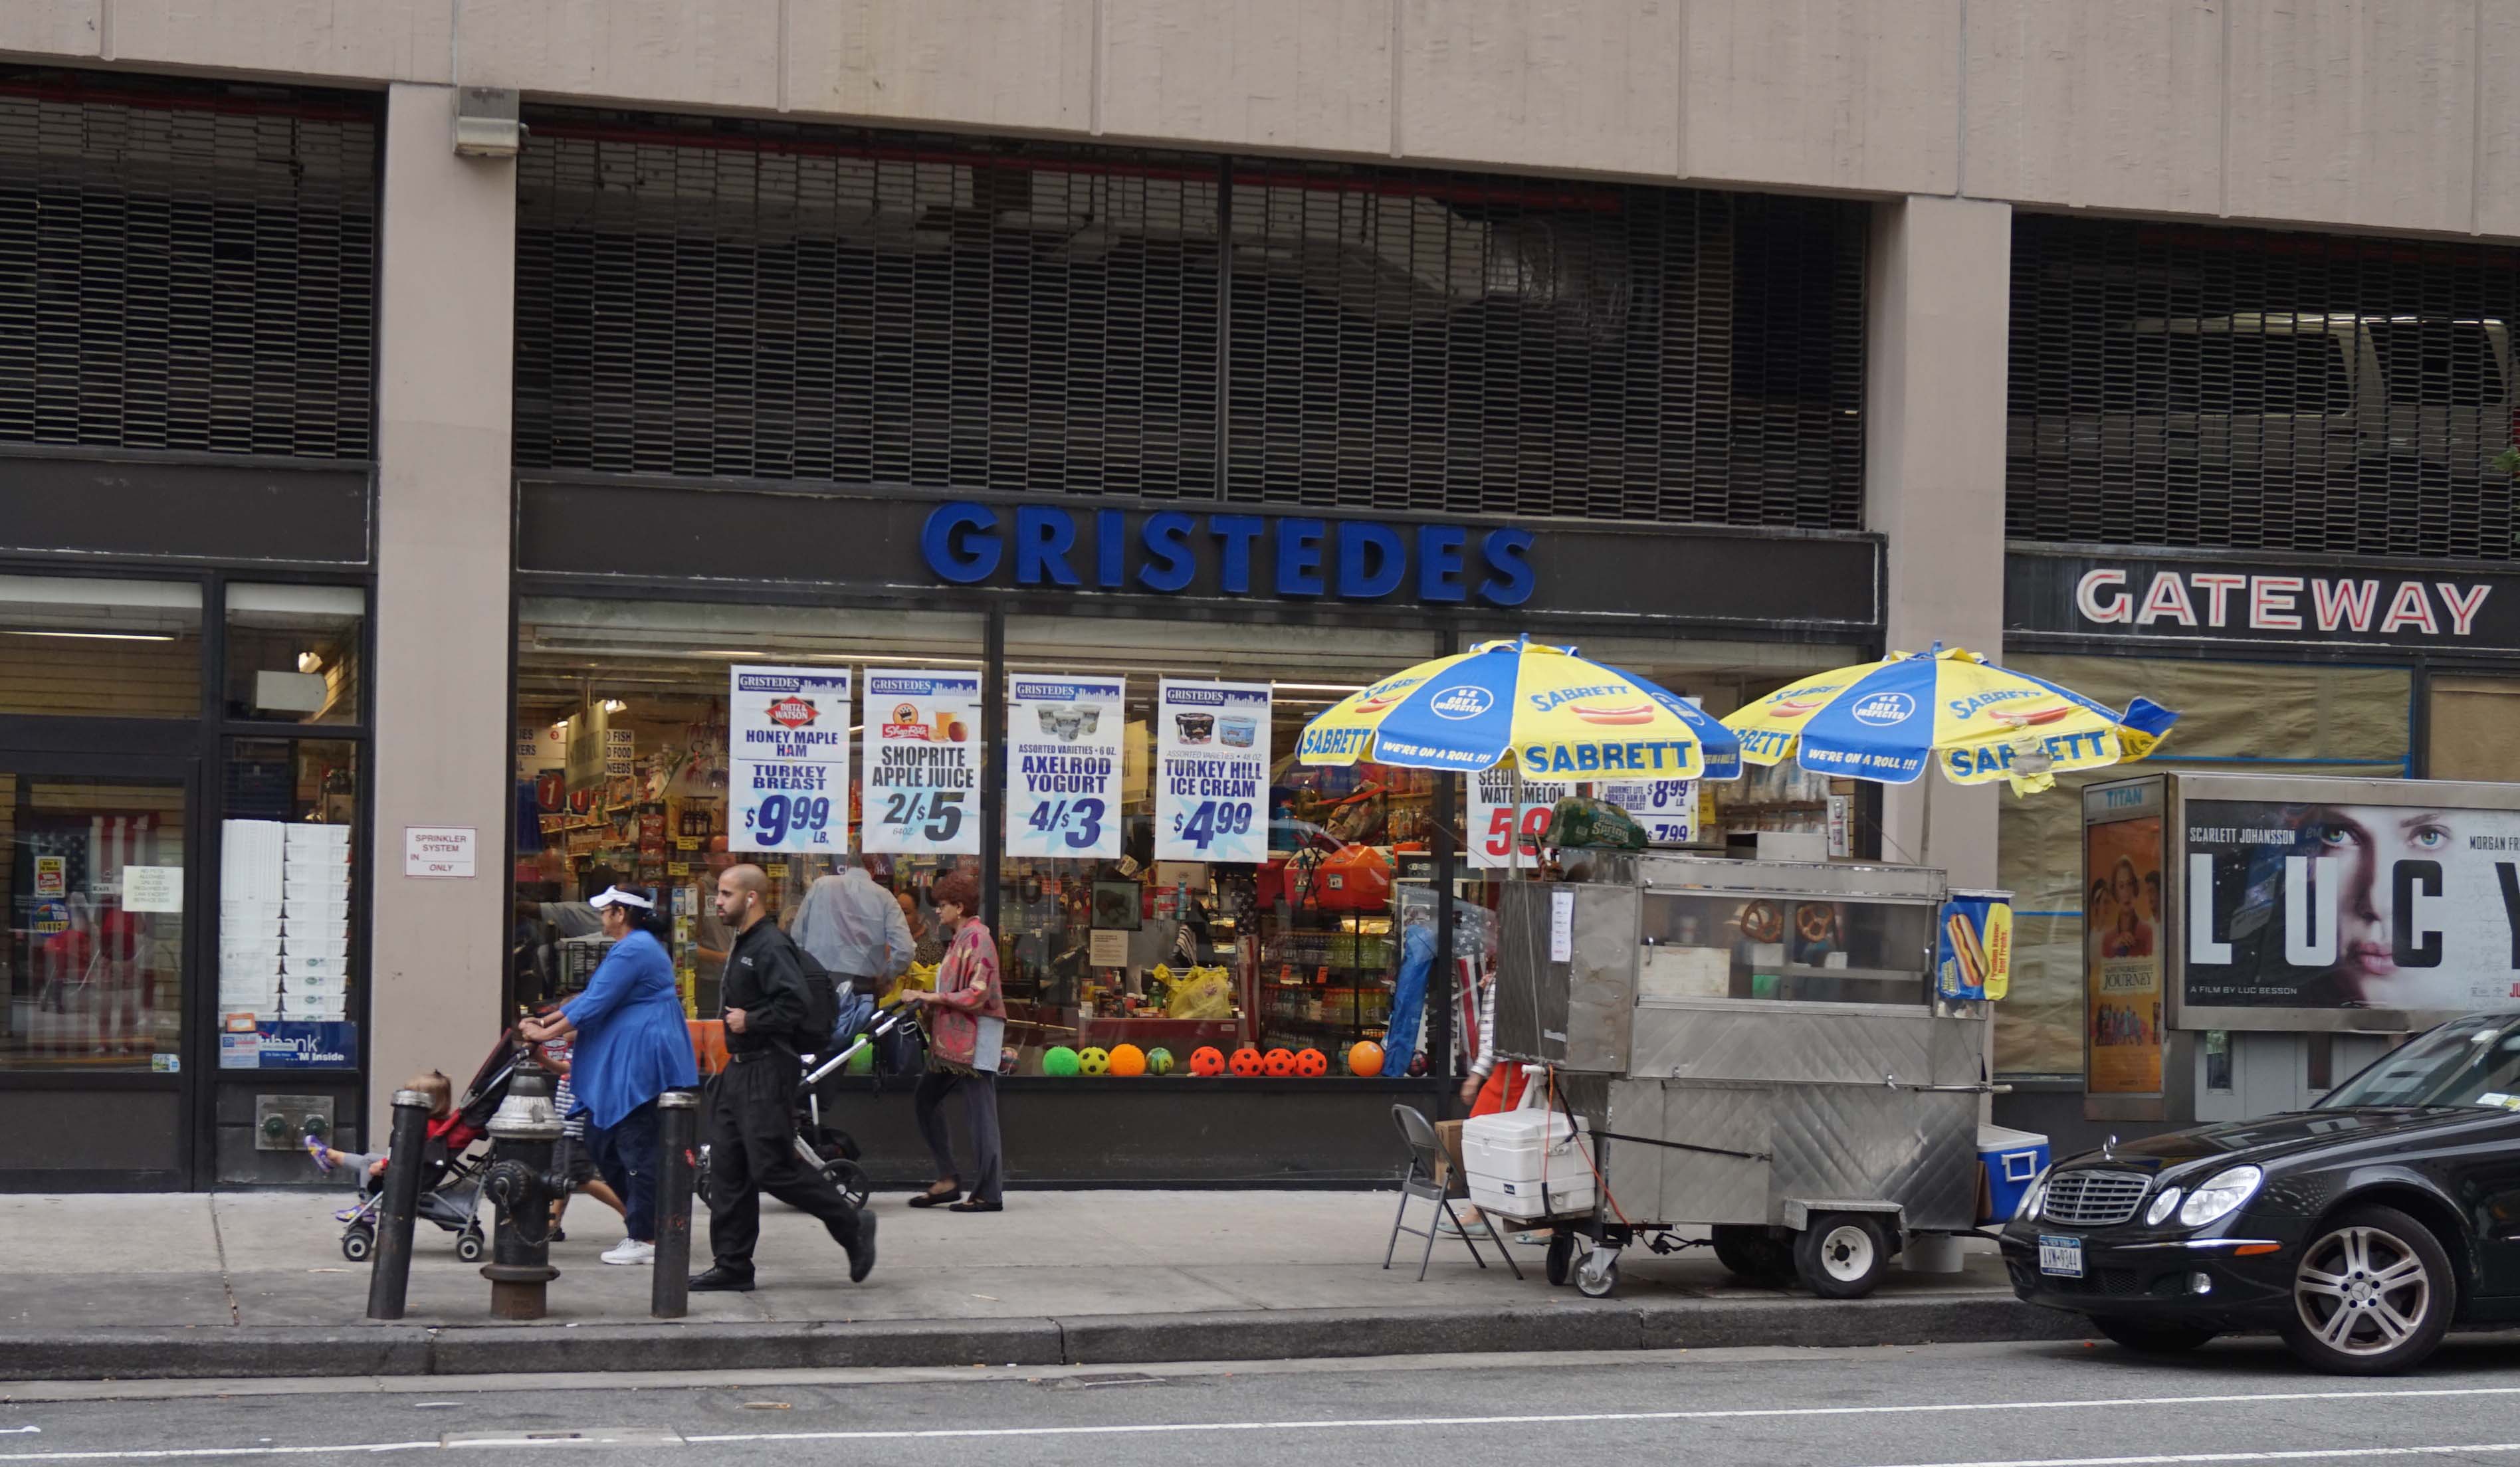 Hotdog guy on South End moved to Gristedes